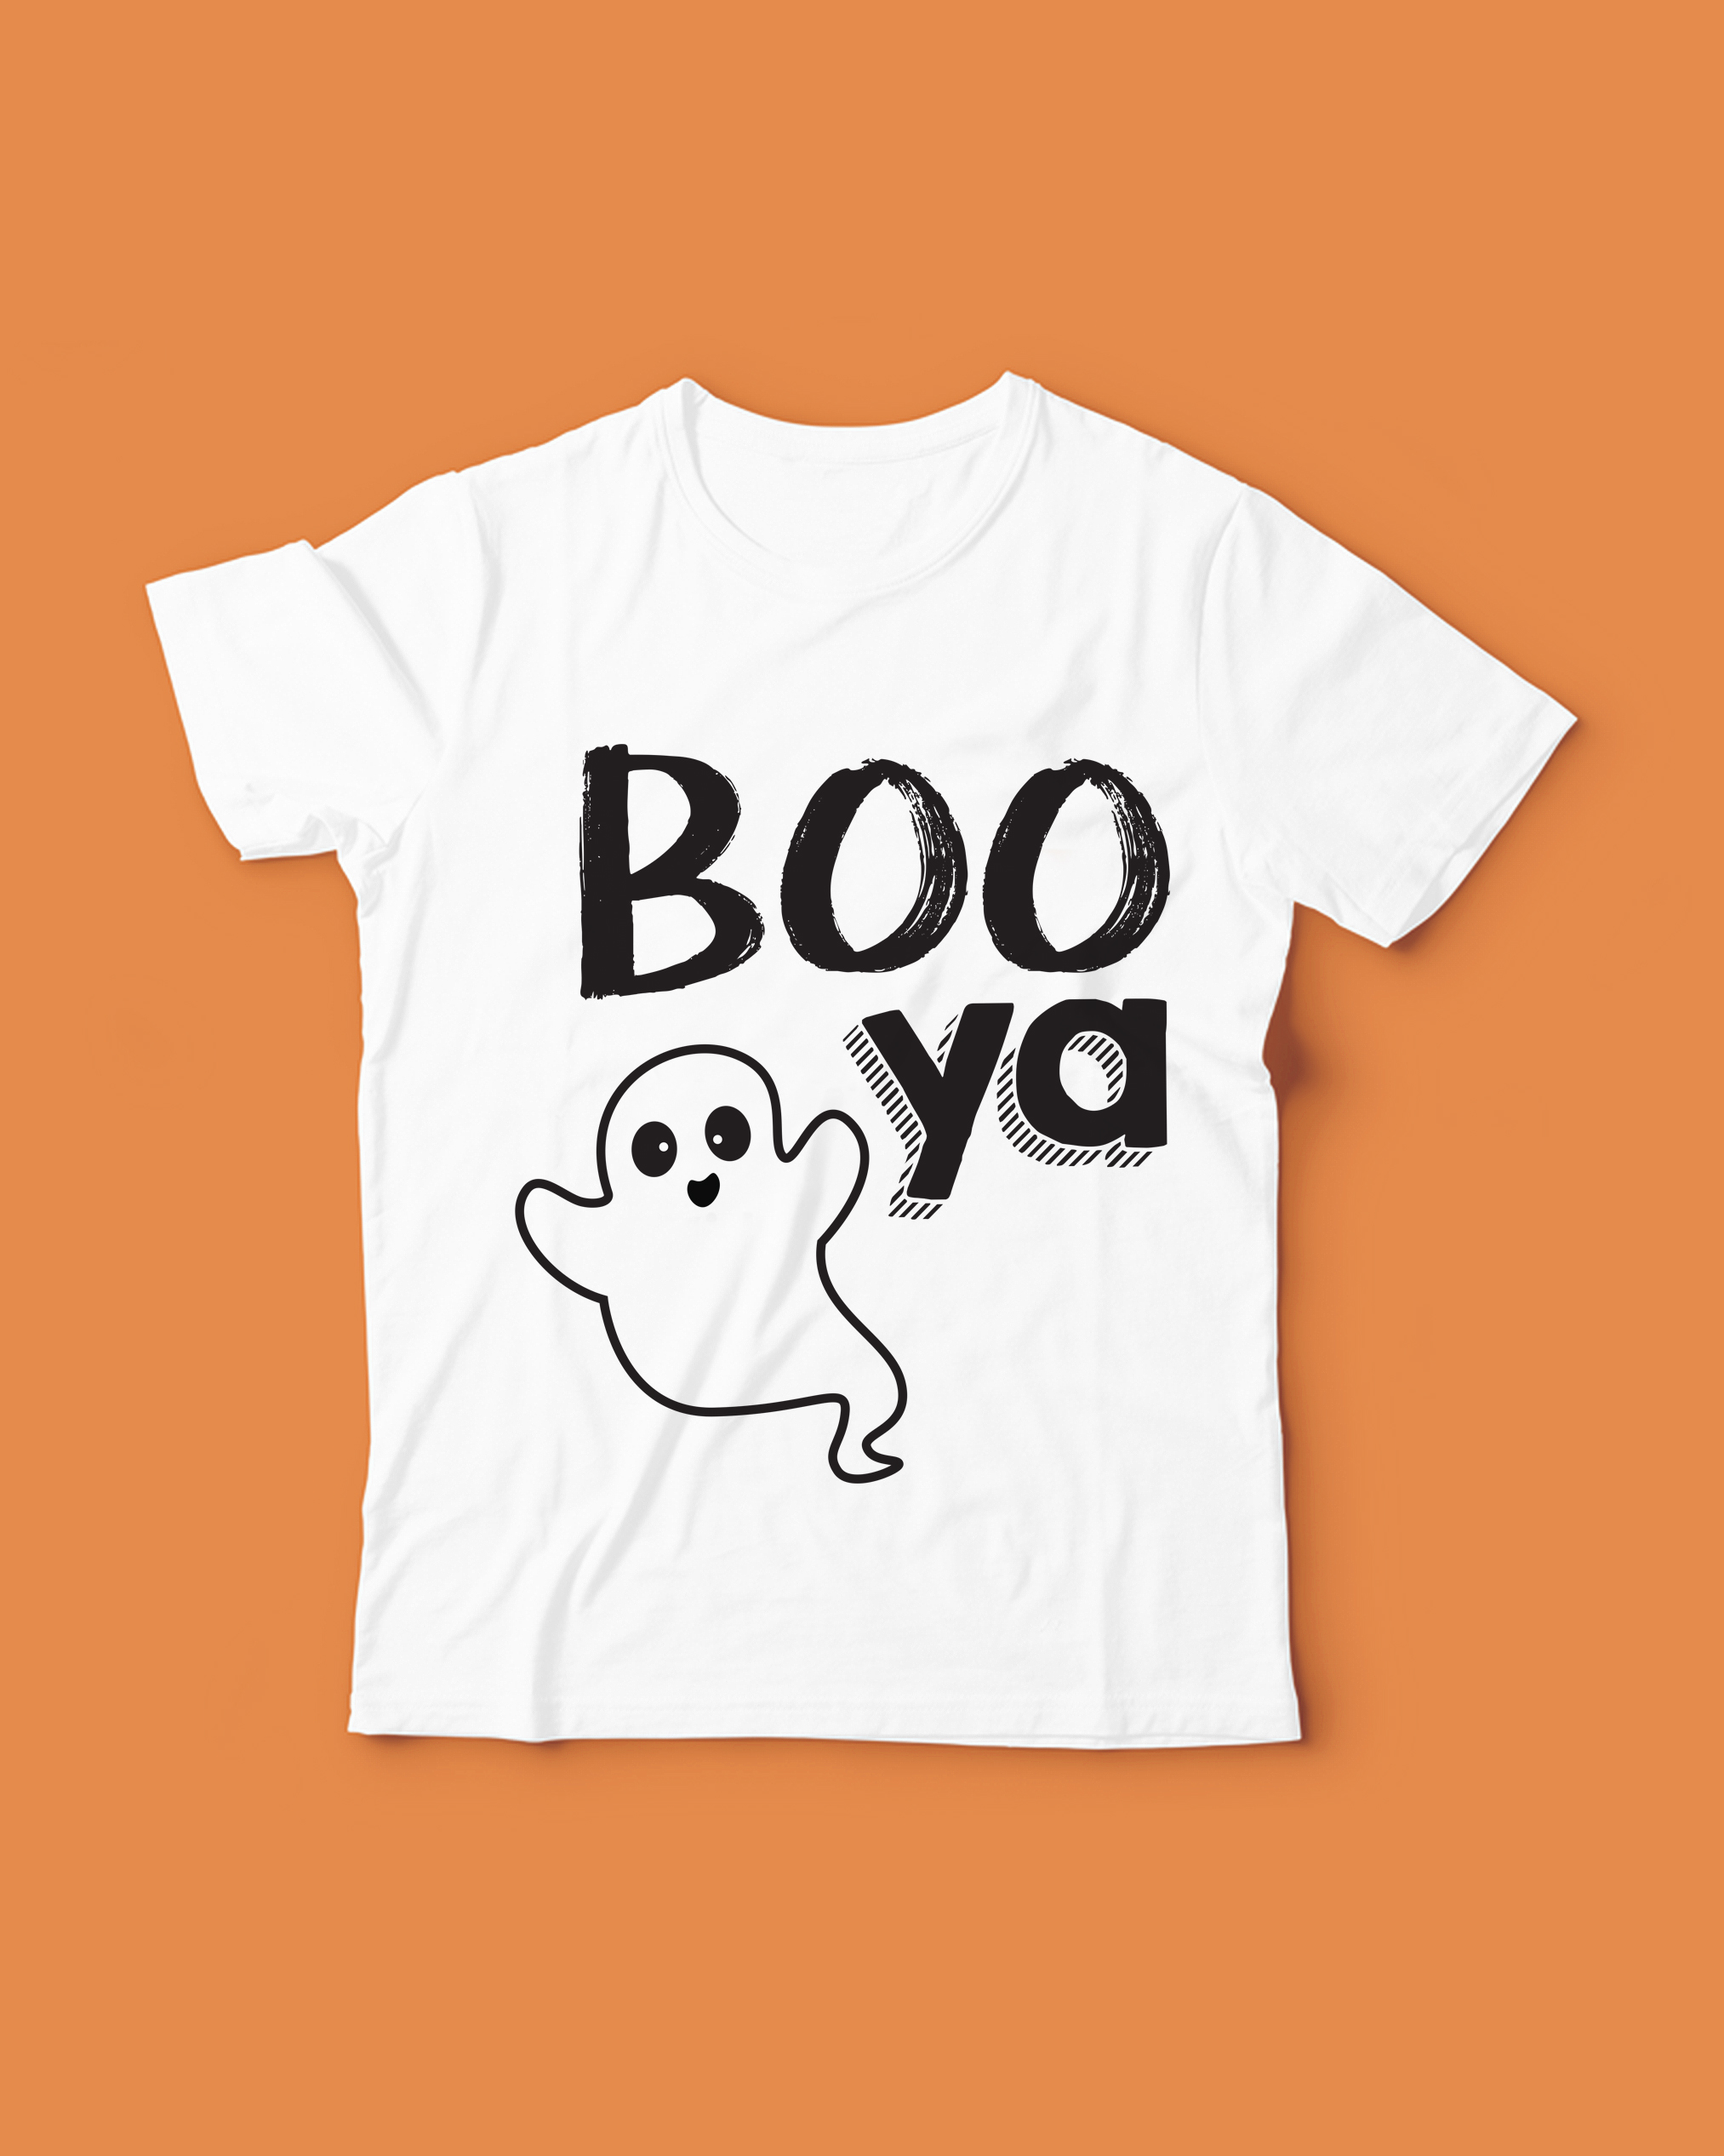 Awesome Halloween T-shirt transfers